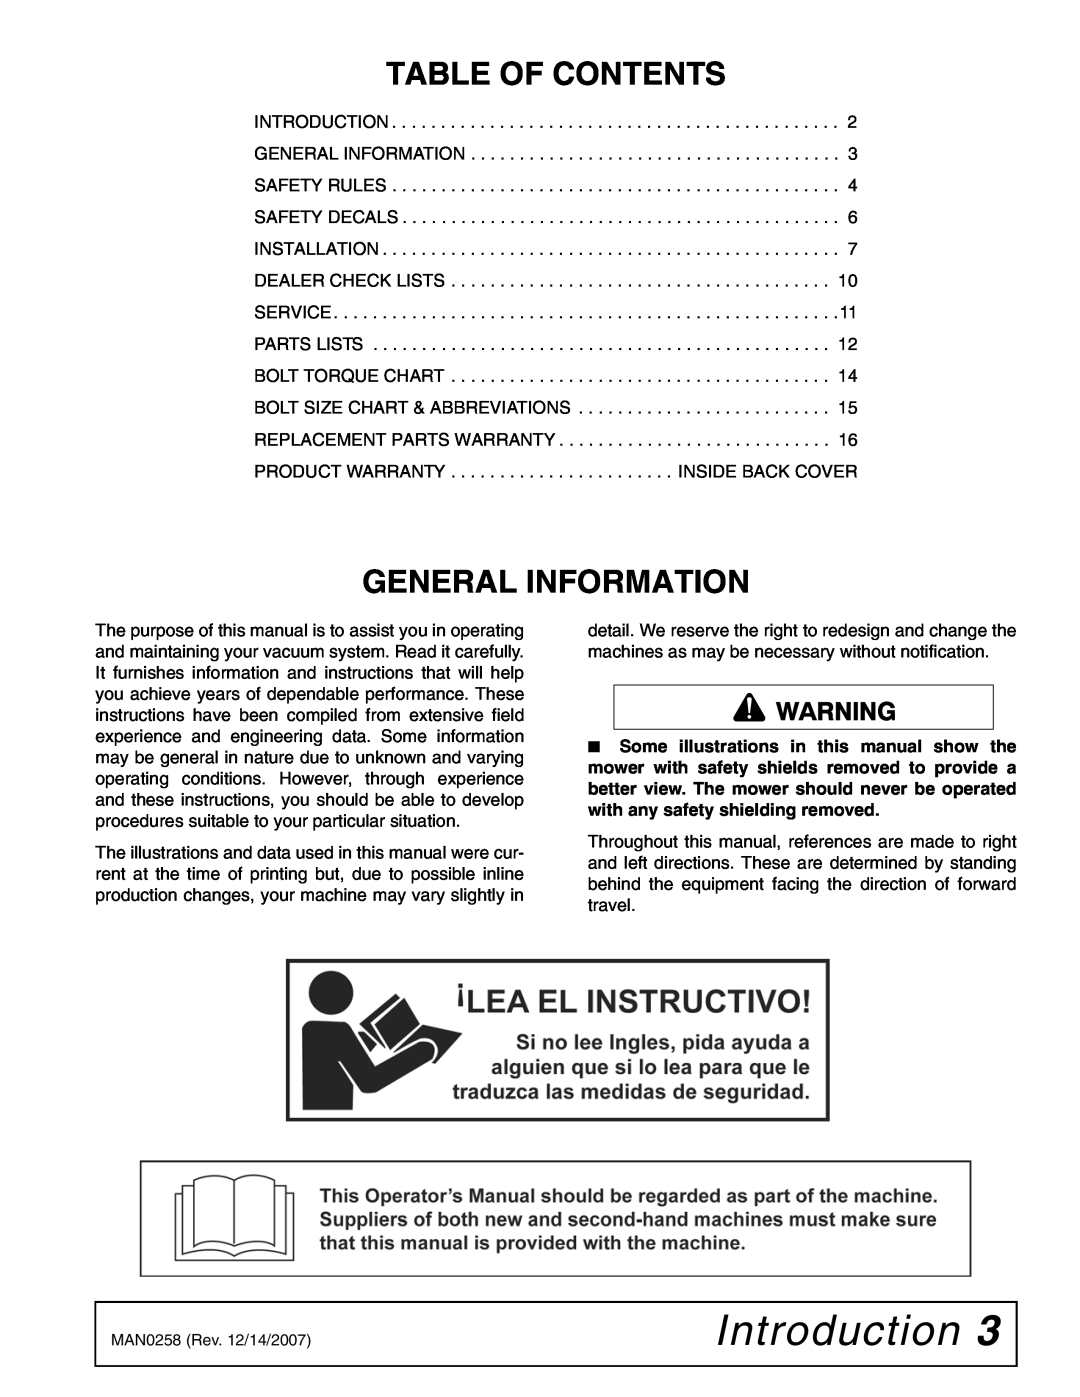 Woods Equipment MX61, MX54 manual Introduction, Table Of Contents, General Information 